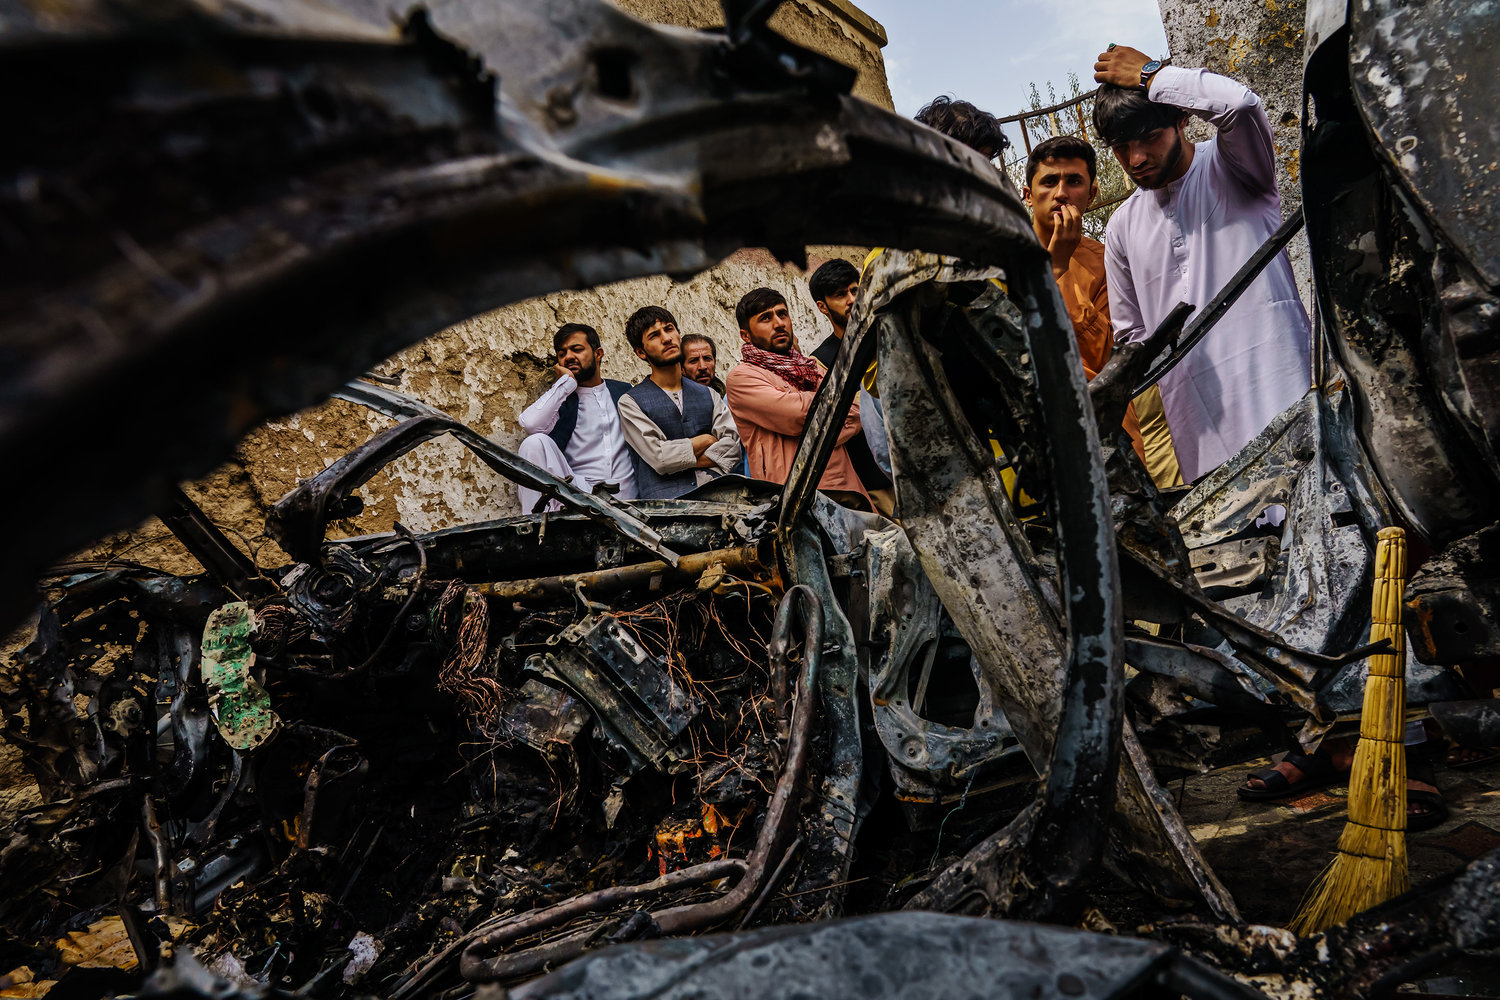 Relatives and neighbors of the Ahmadi family gathered around the incinerated husk of a vehicle that the family says was hit by a U.S. drone strike, in Kabul, Afghanistan, in August. (Marcus Yam/Los Angeles Times/TNS)